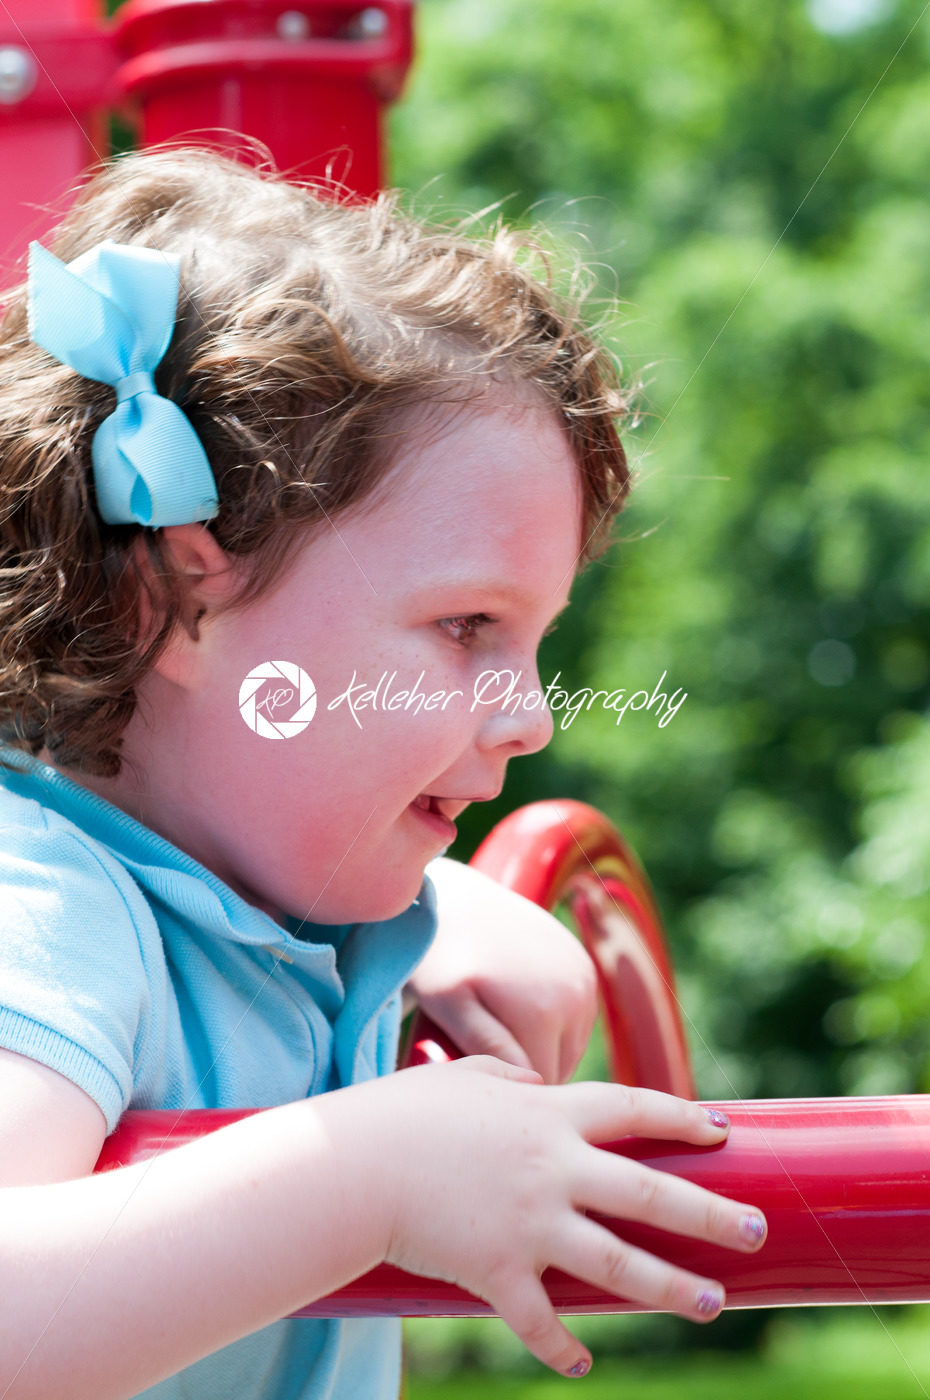 Young girl having fun outside at park on a playground swing set - Kelleher Photography Store